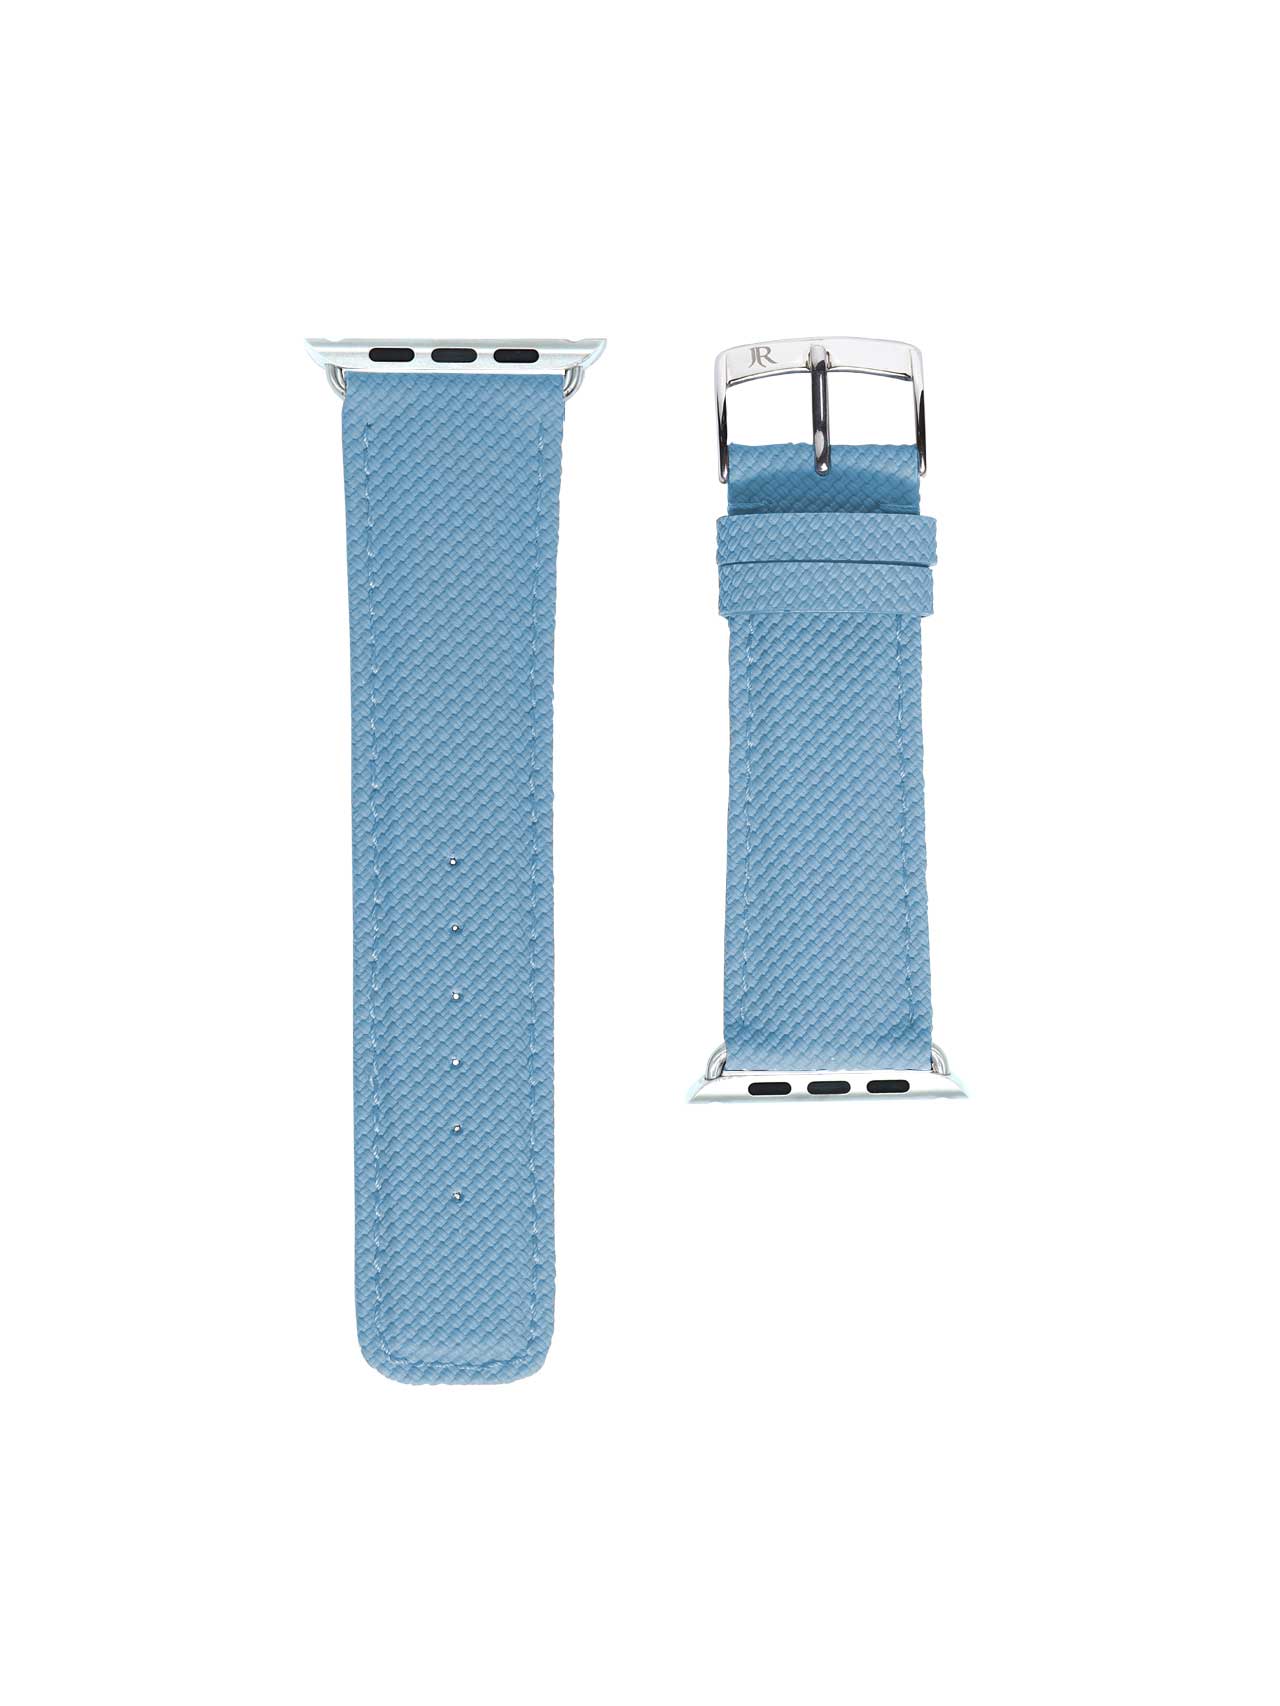 •	Classic Apple watch band